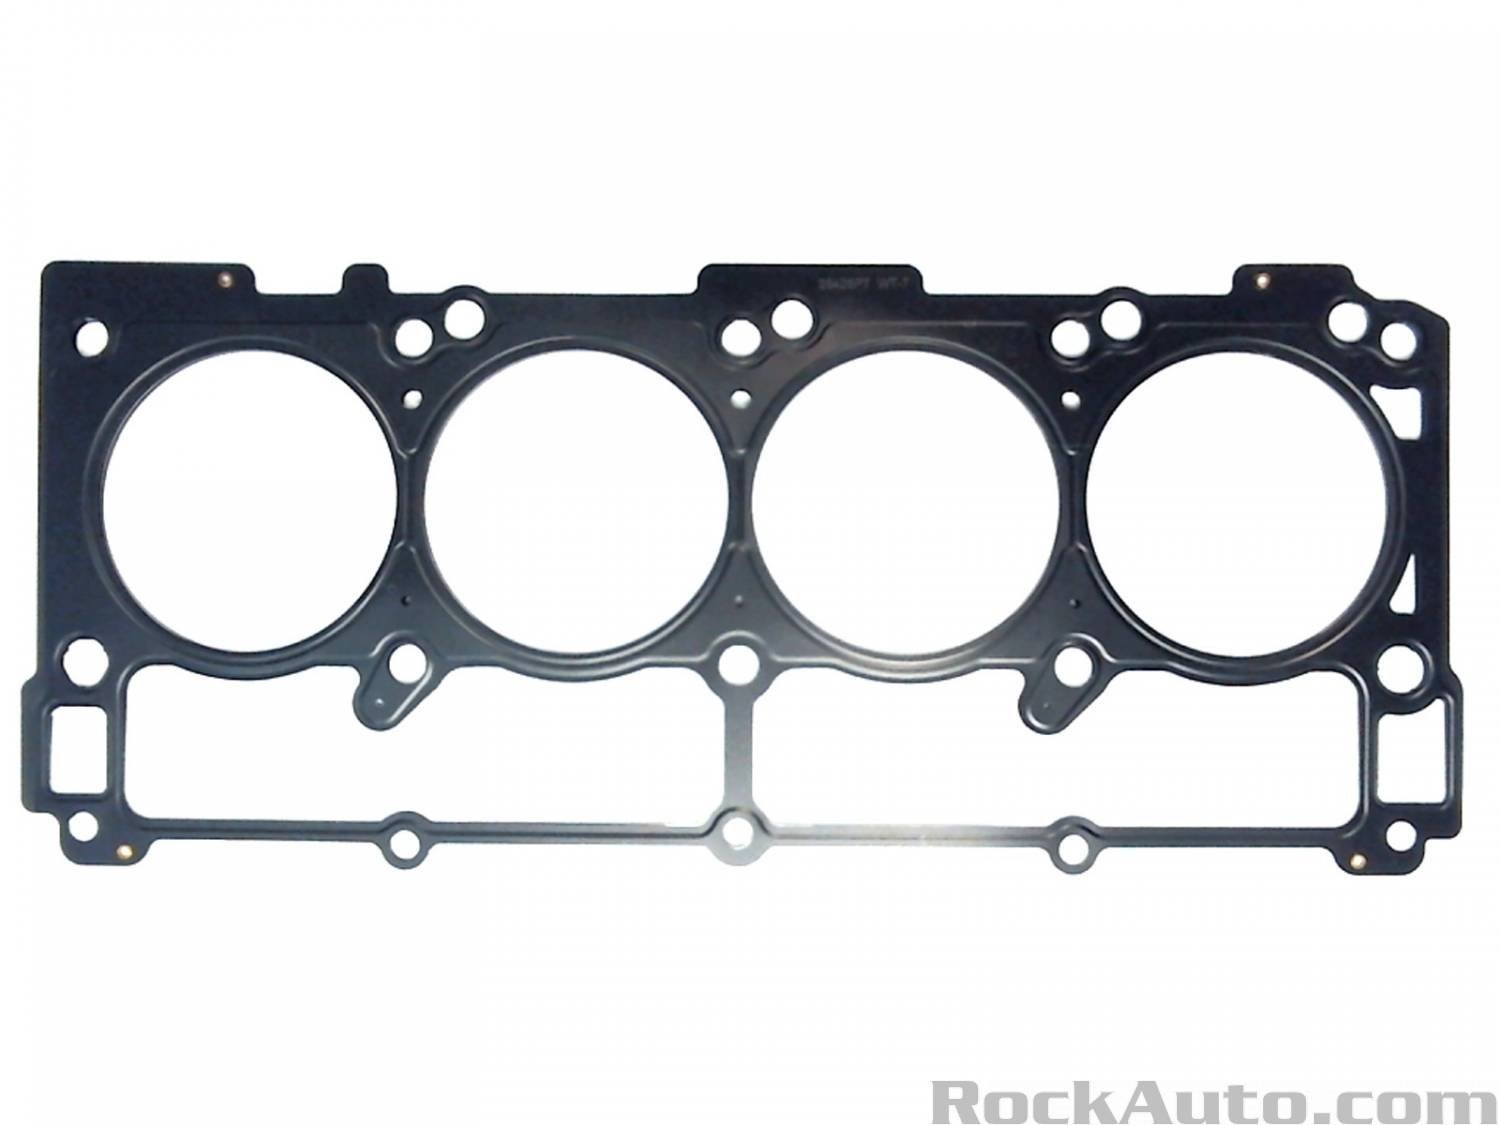 ULTRA-POWER Head Gasket (RIGHT): Multi layer Steel - Suit 5.7L hemi (See Listing for applications)